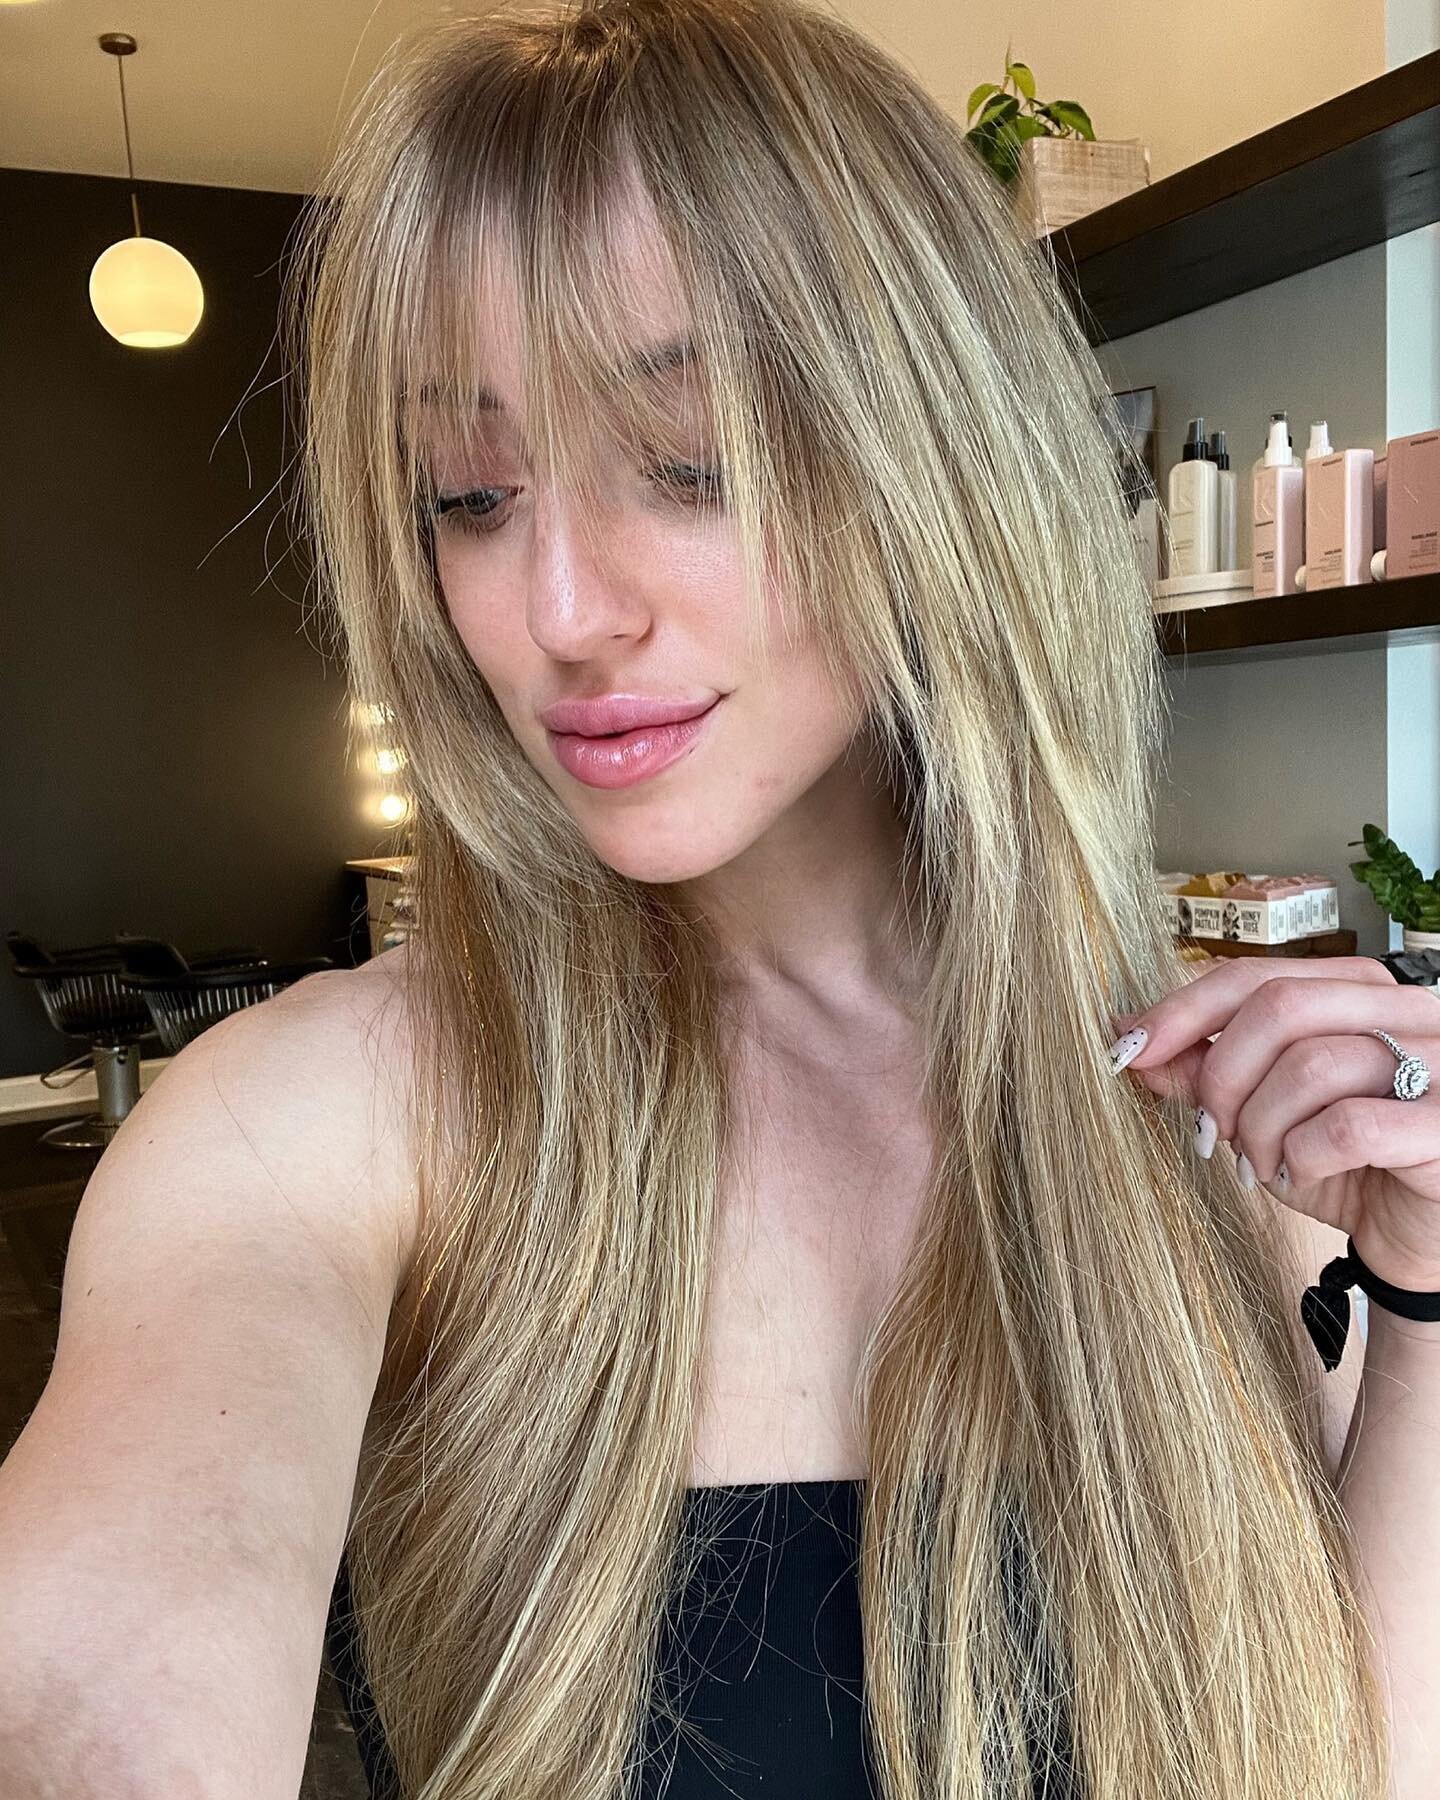 Can&rsquo;t get enough of the shaggy look. Once again&hellip;I have cut my own hair 😝😬😬😬. I LOVE shaggy layers because they create so much volume on my otherwise VERY flat hair. Customized shaggy layers are flattering in just about anyone so if y